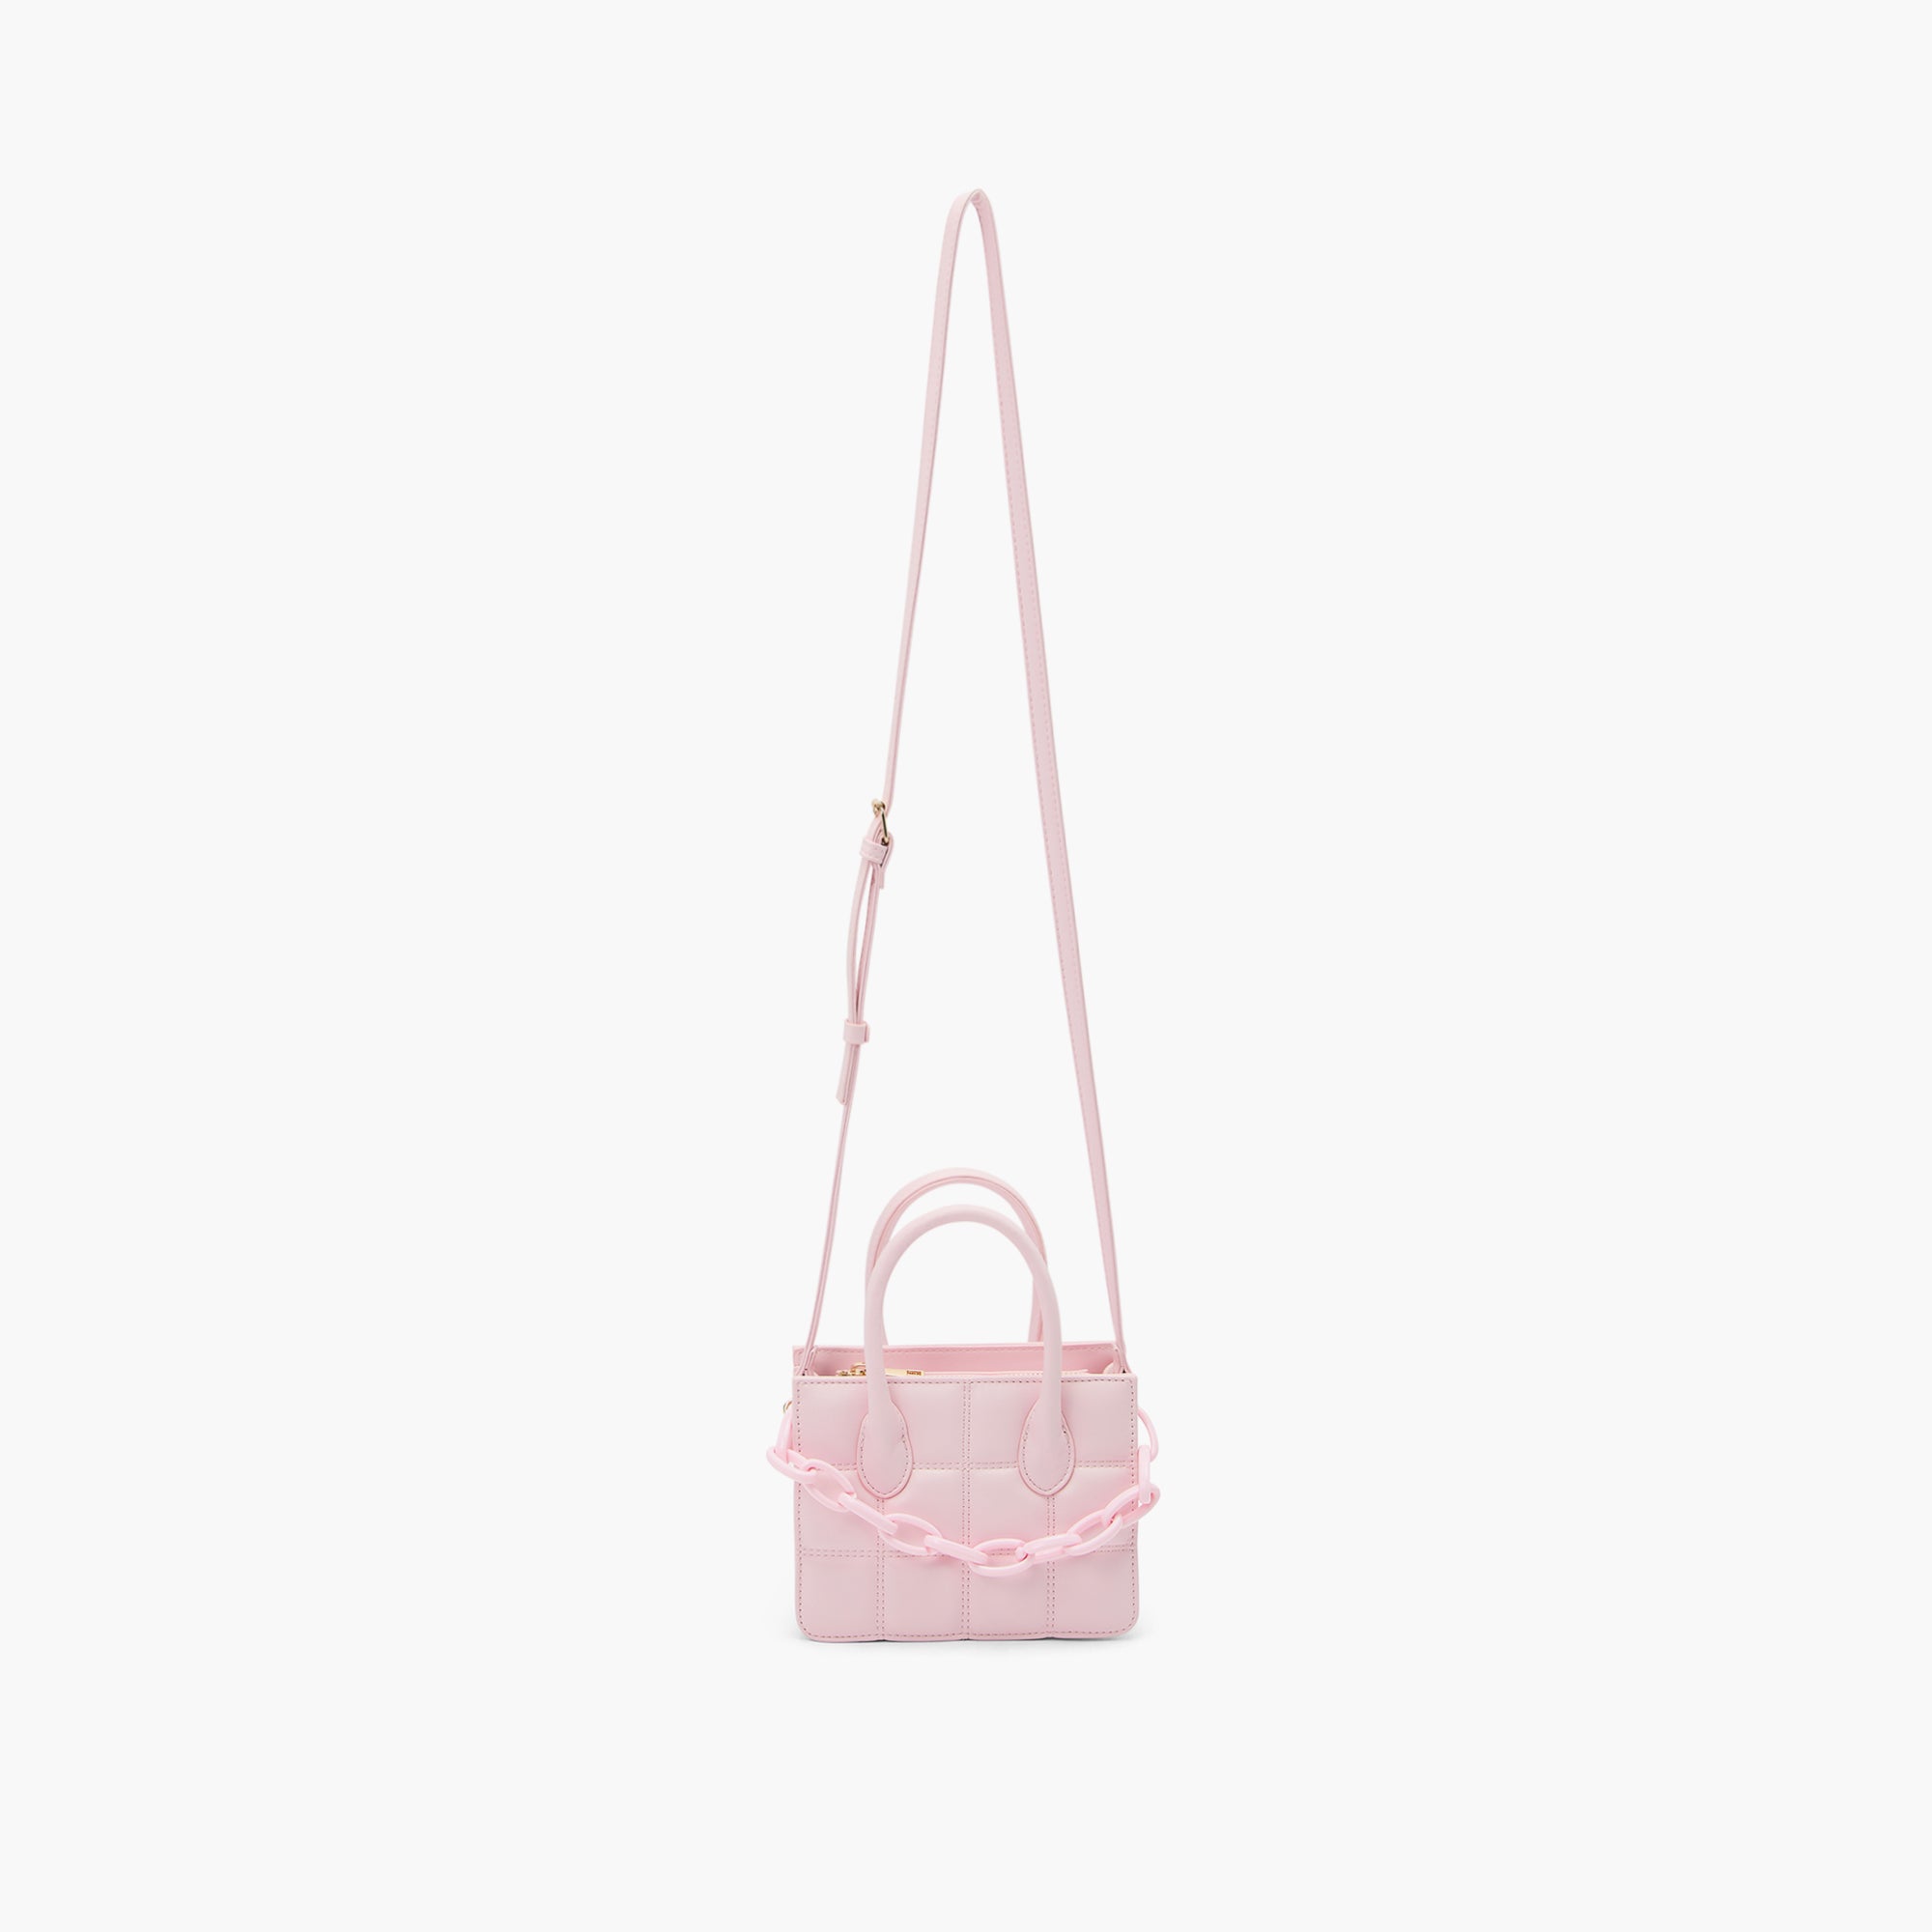 Pink bags for teenage girls | Gallery posted by Becca | Lemon8